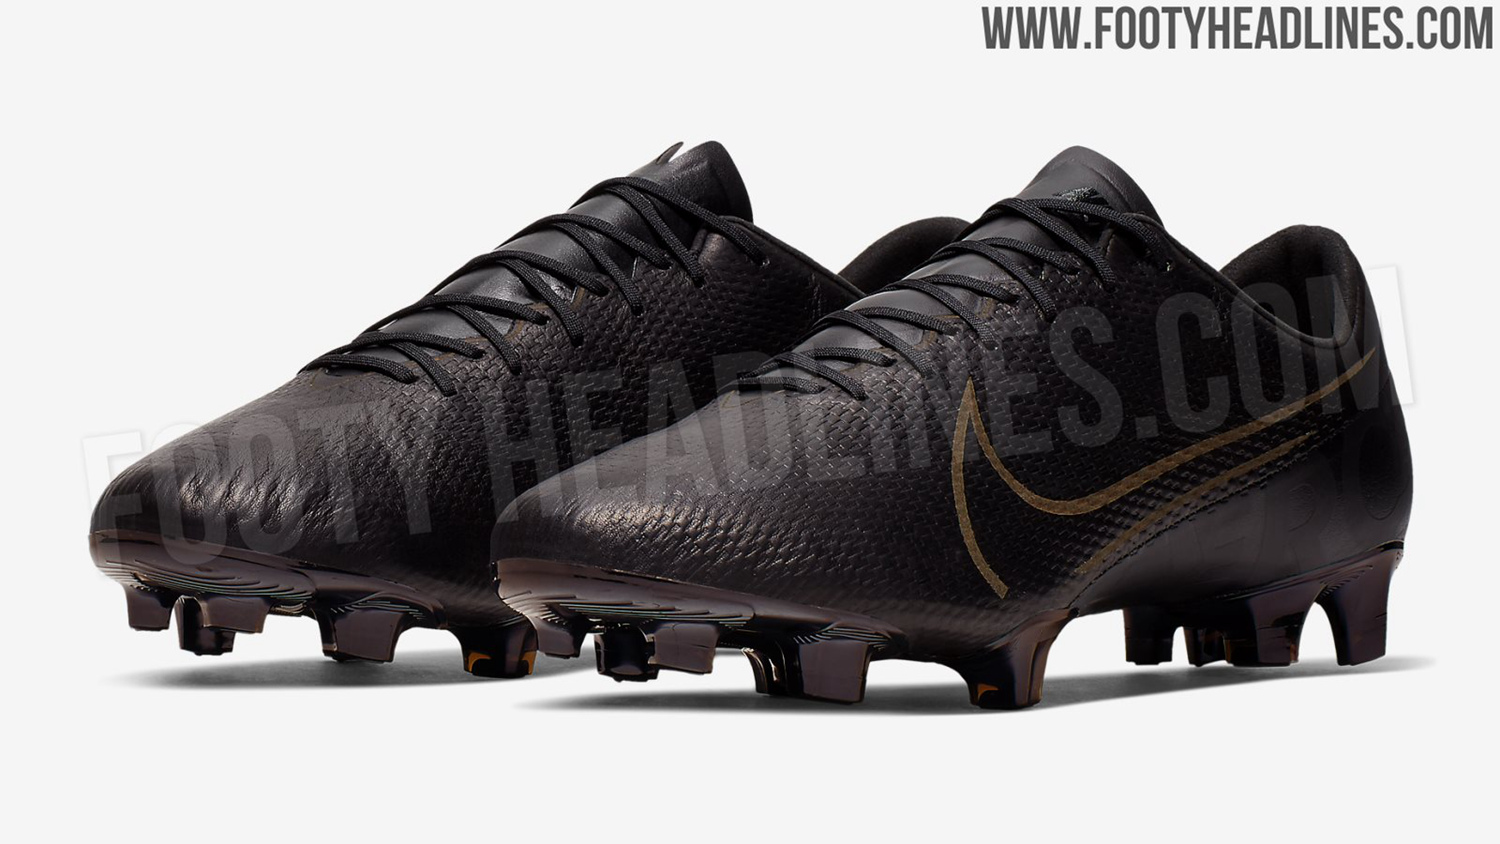 THE $150 SUPERFLY IS AMAZING! Nike Mercurial Superfly